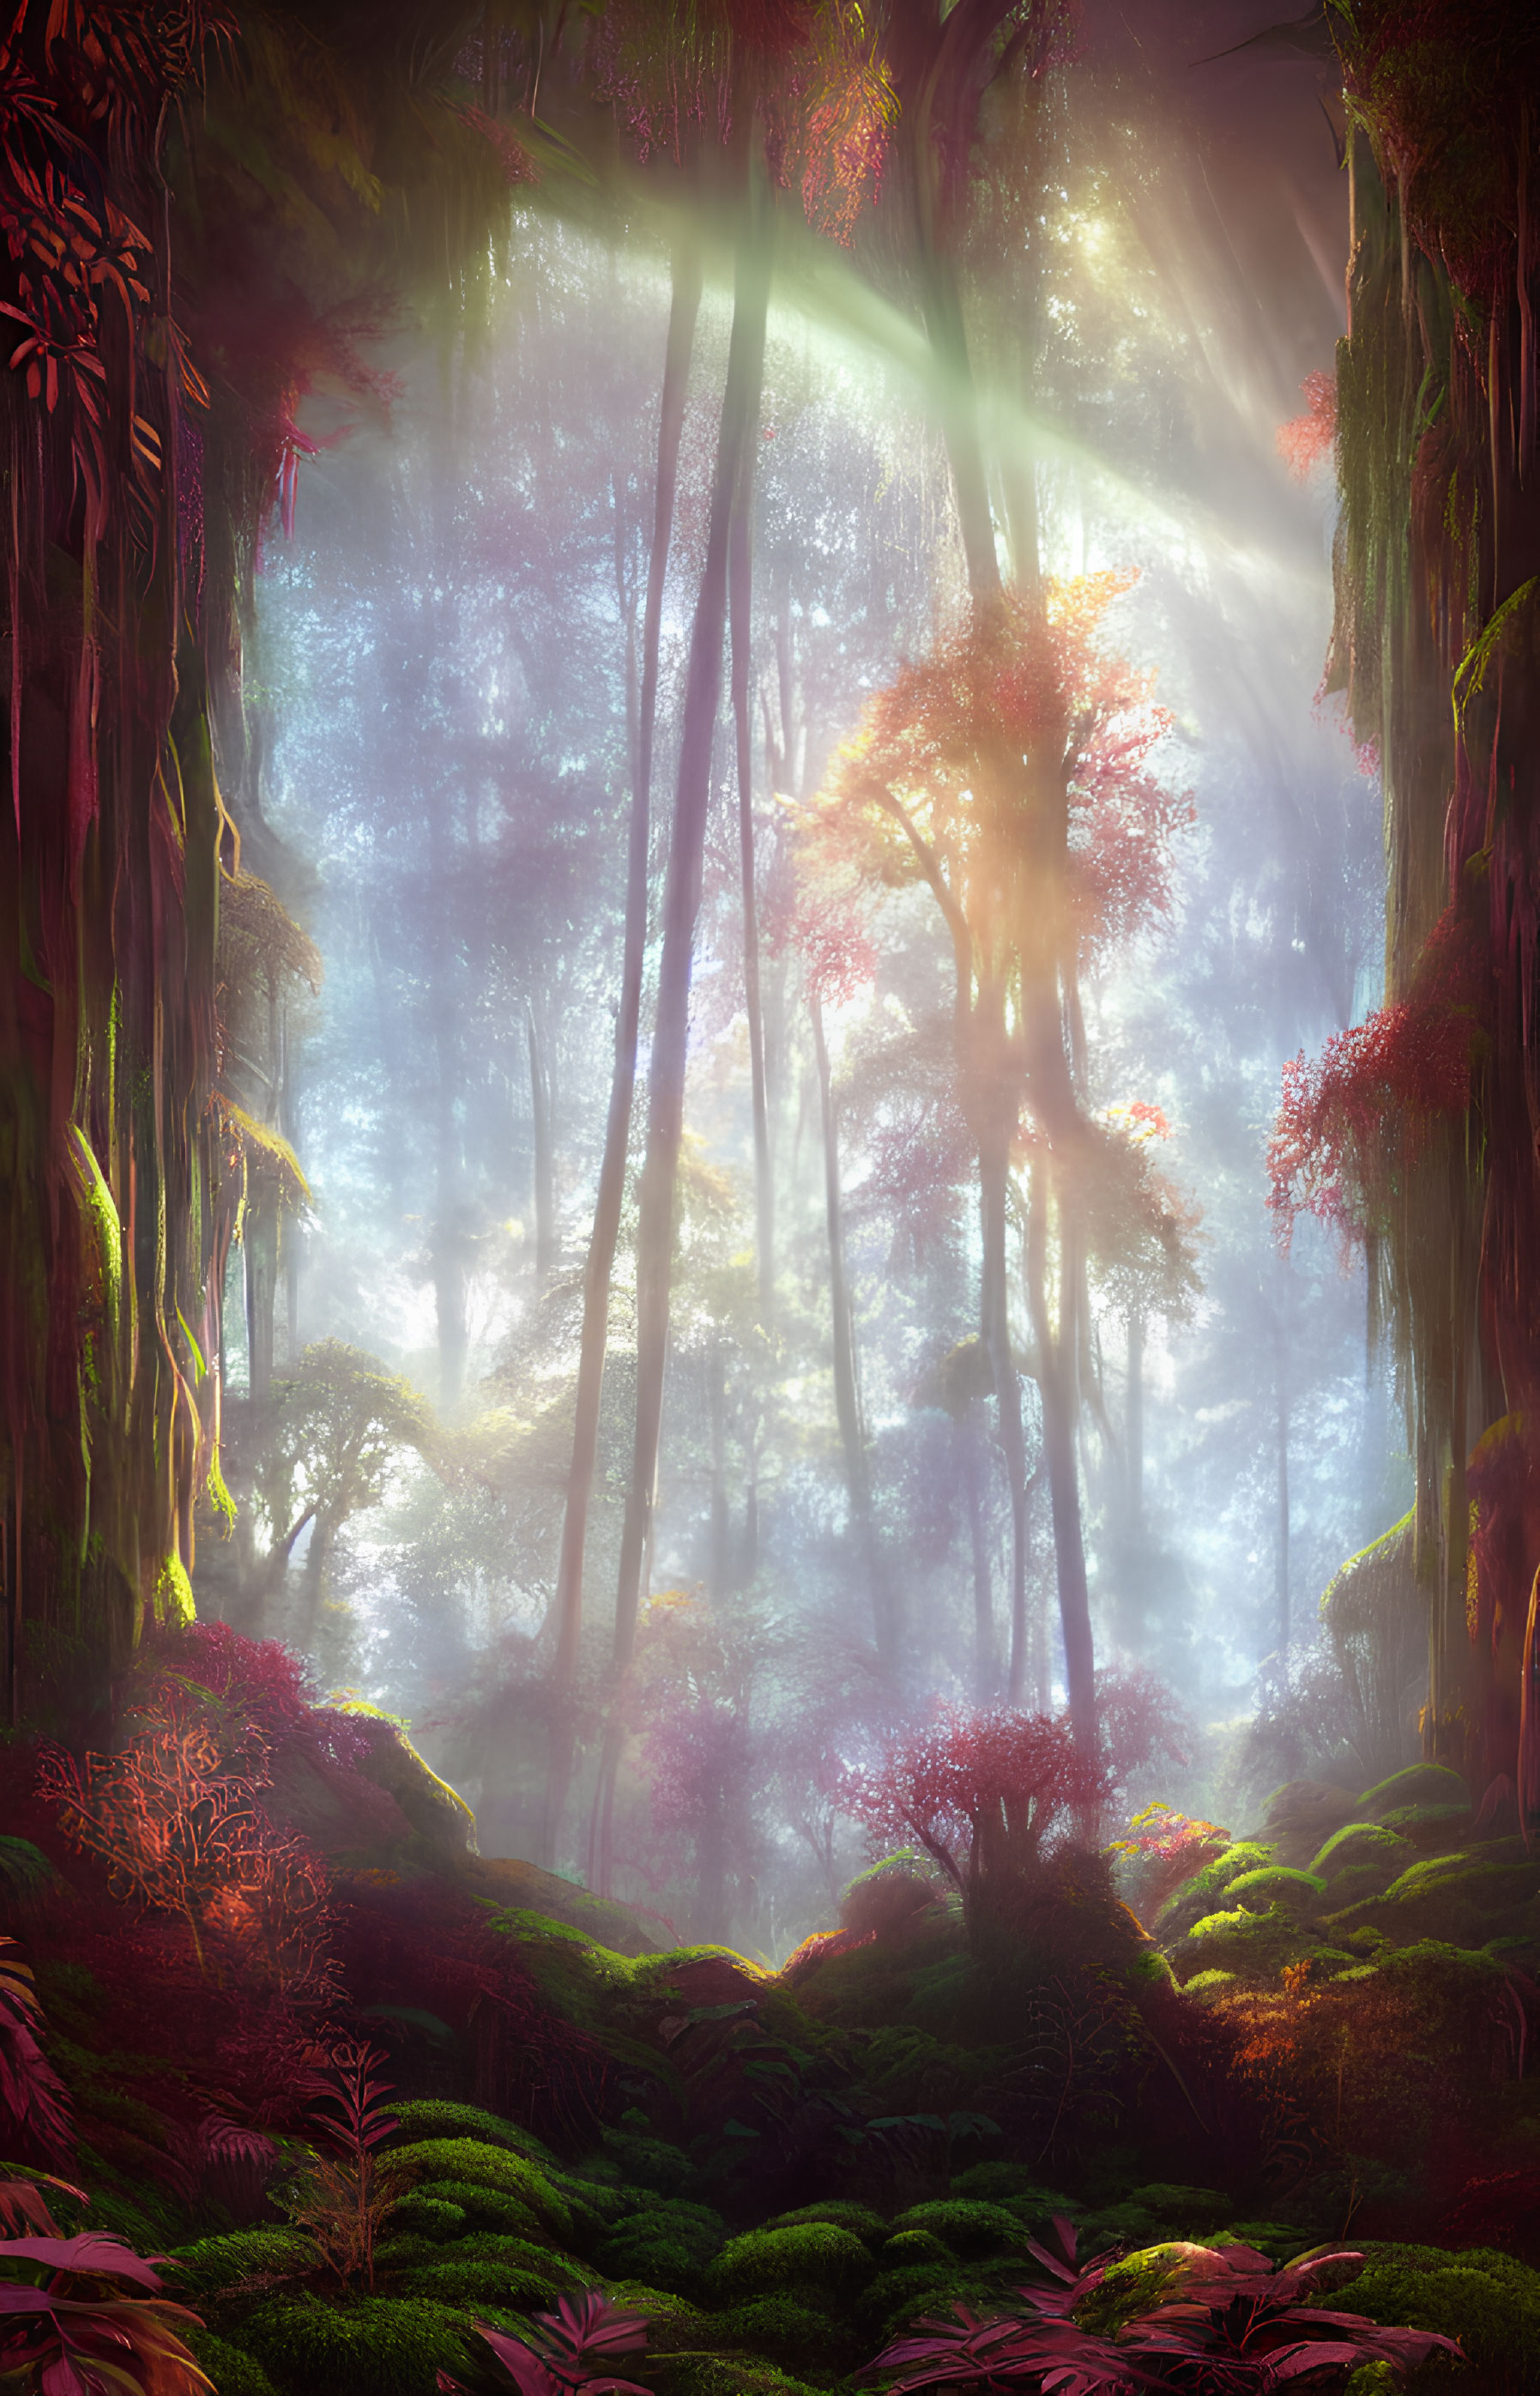 Enchanting forest scene: towering trees, vibrant greenery, light rays, purple and pink foliage